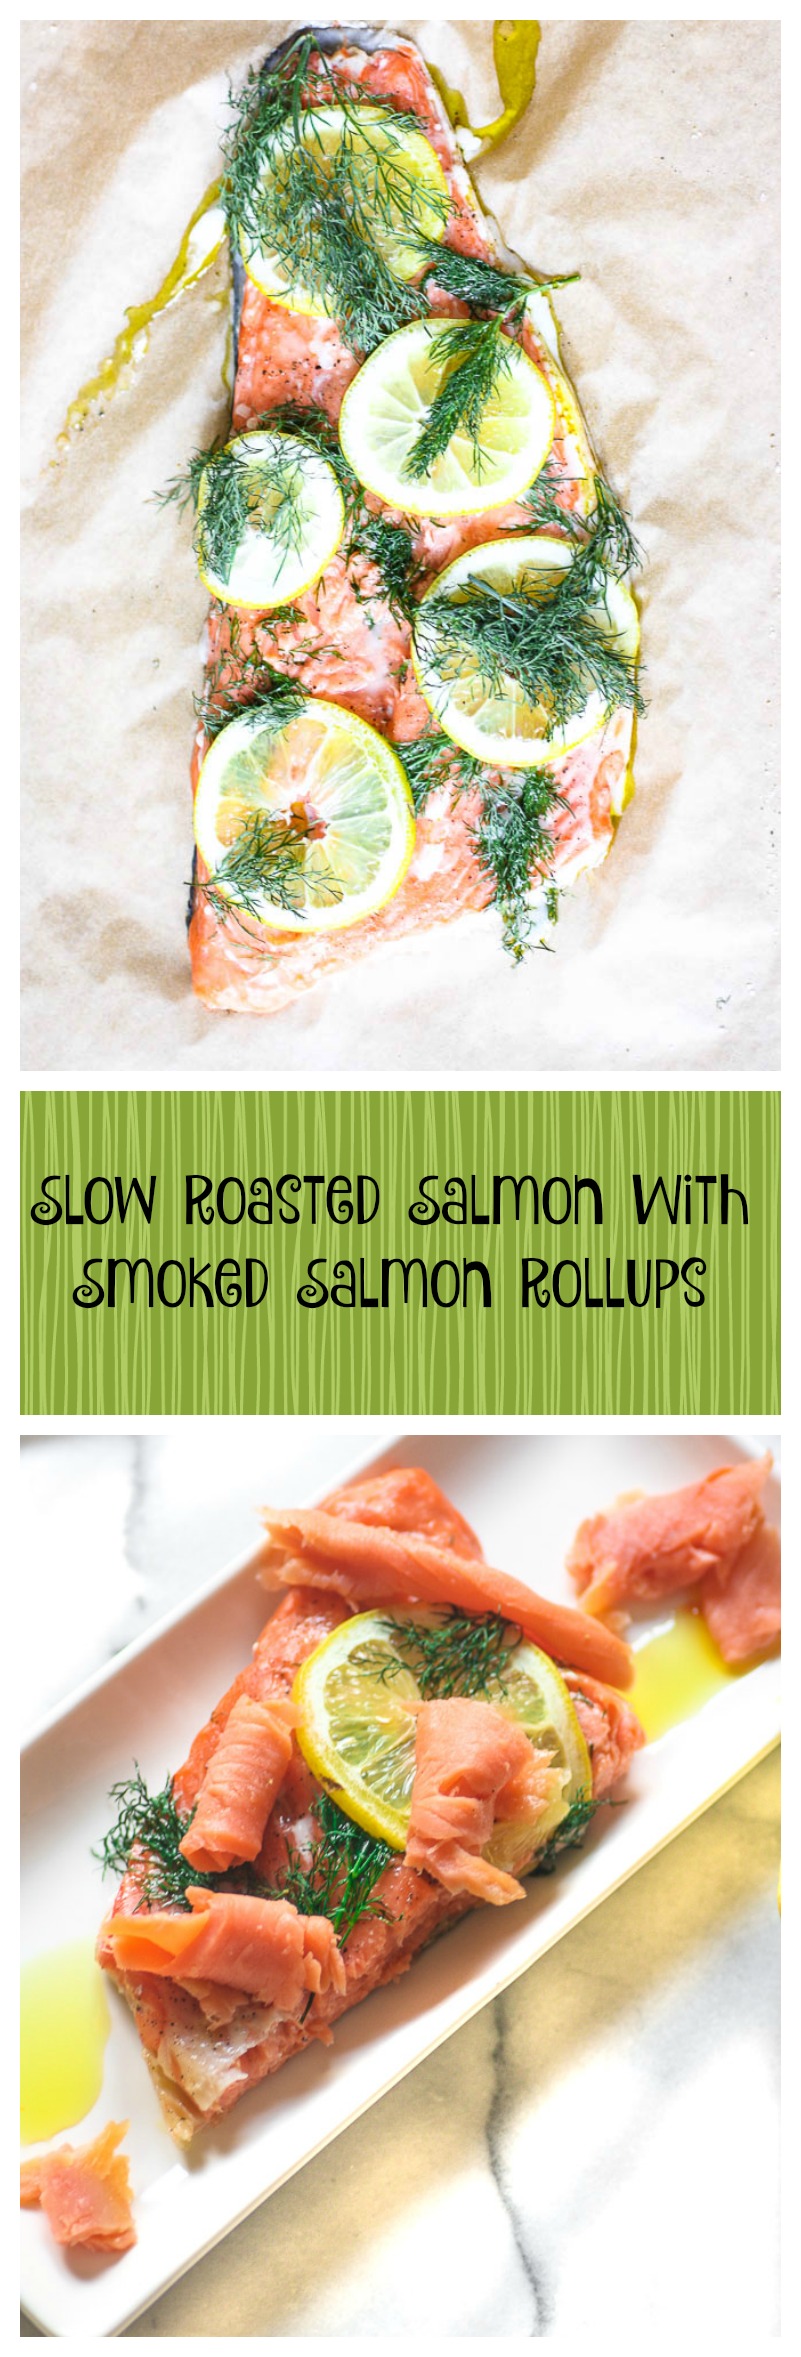 slow roasted salmon with smoked salmon rollups